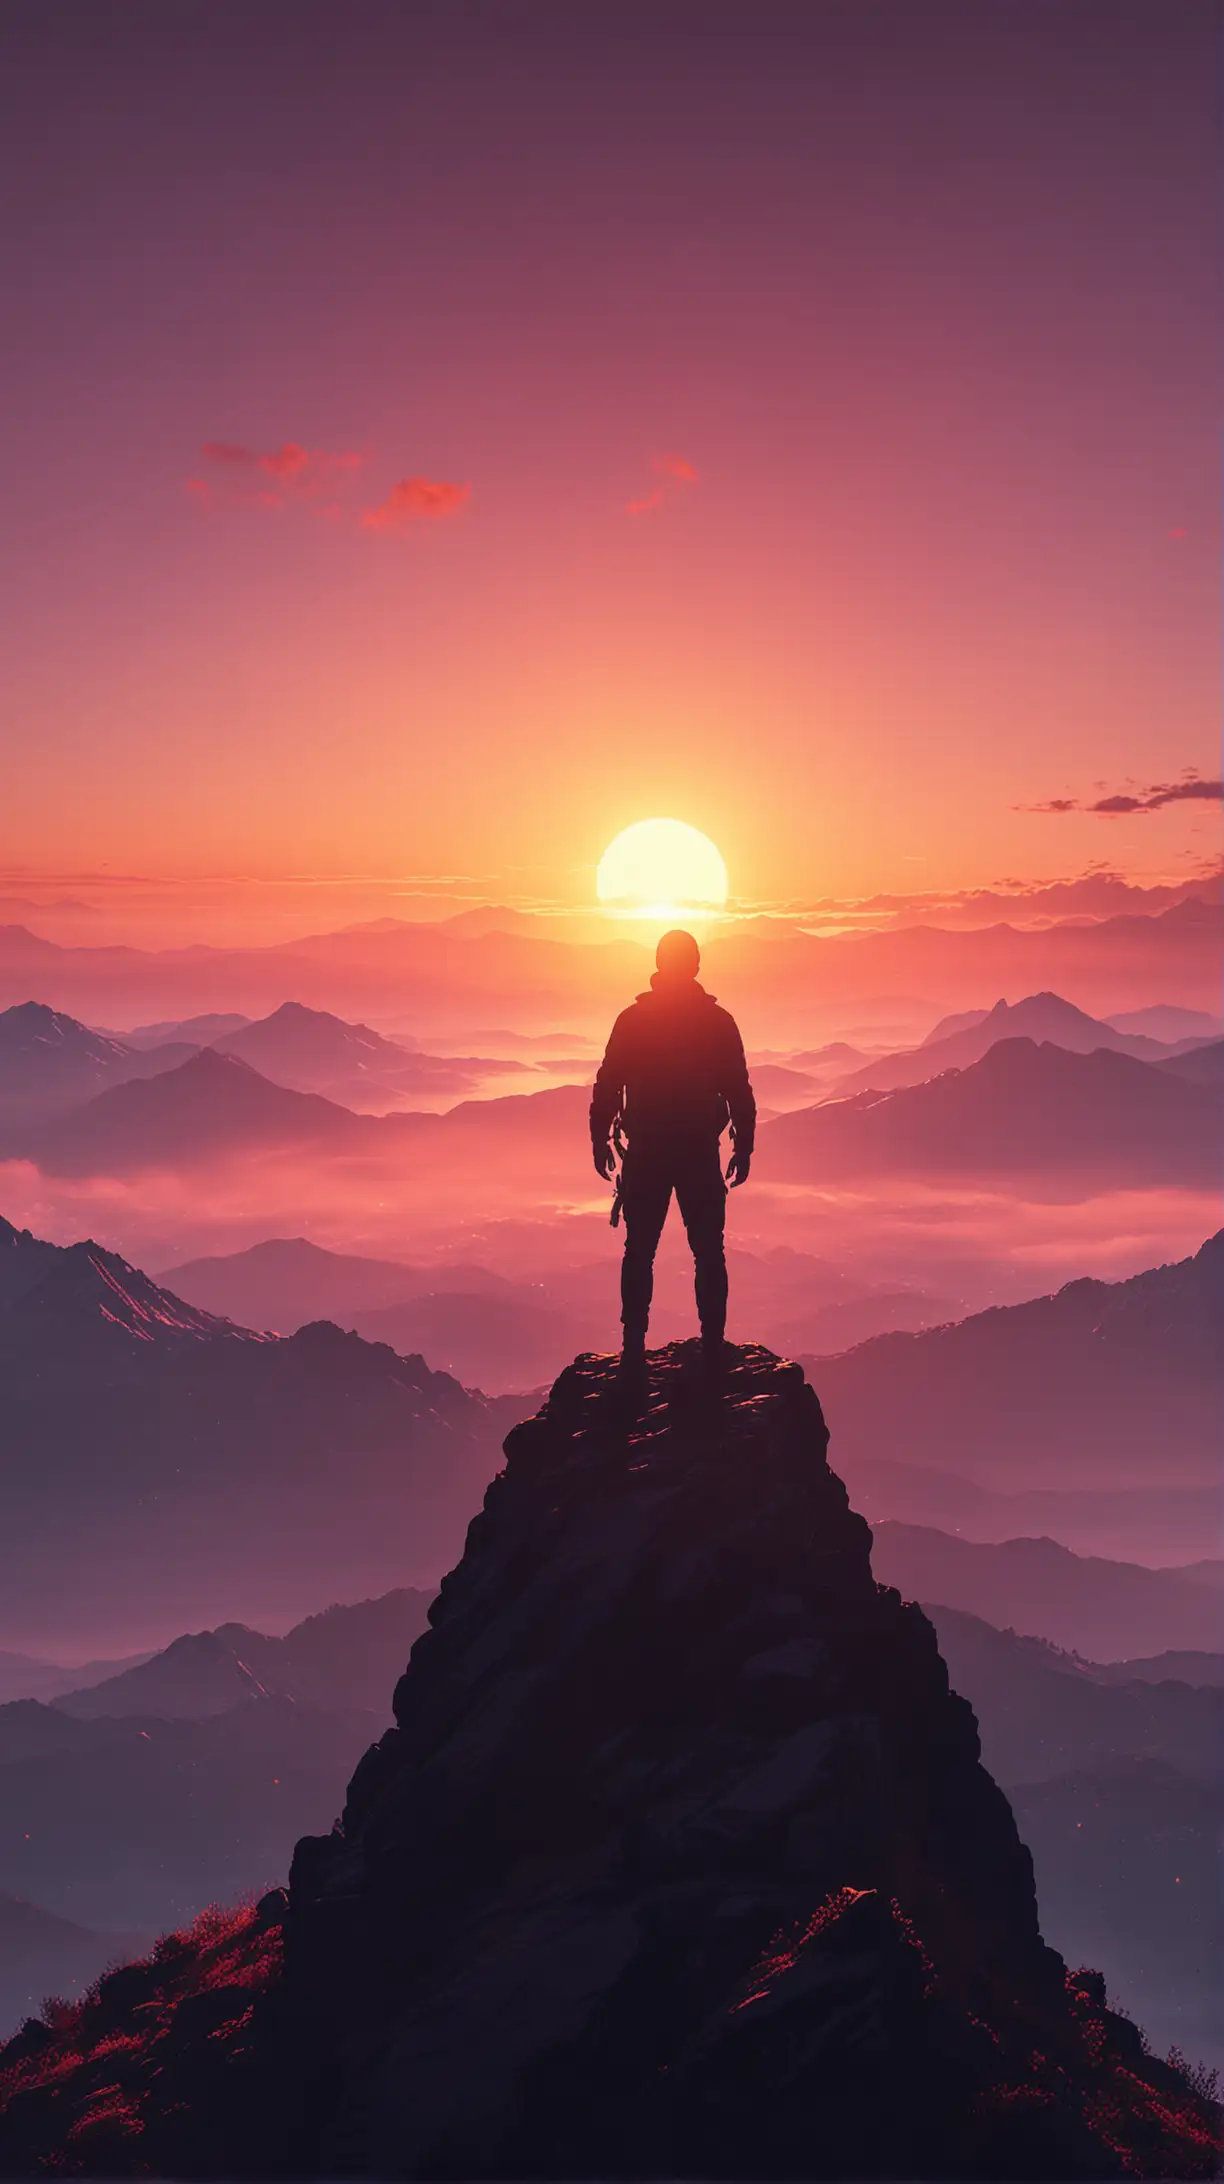 Man Triumphantly Conquering Mountain Summit at Sunrise